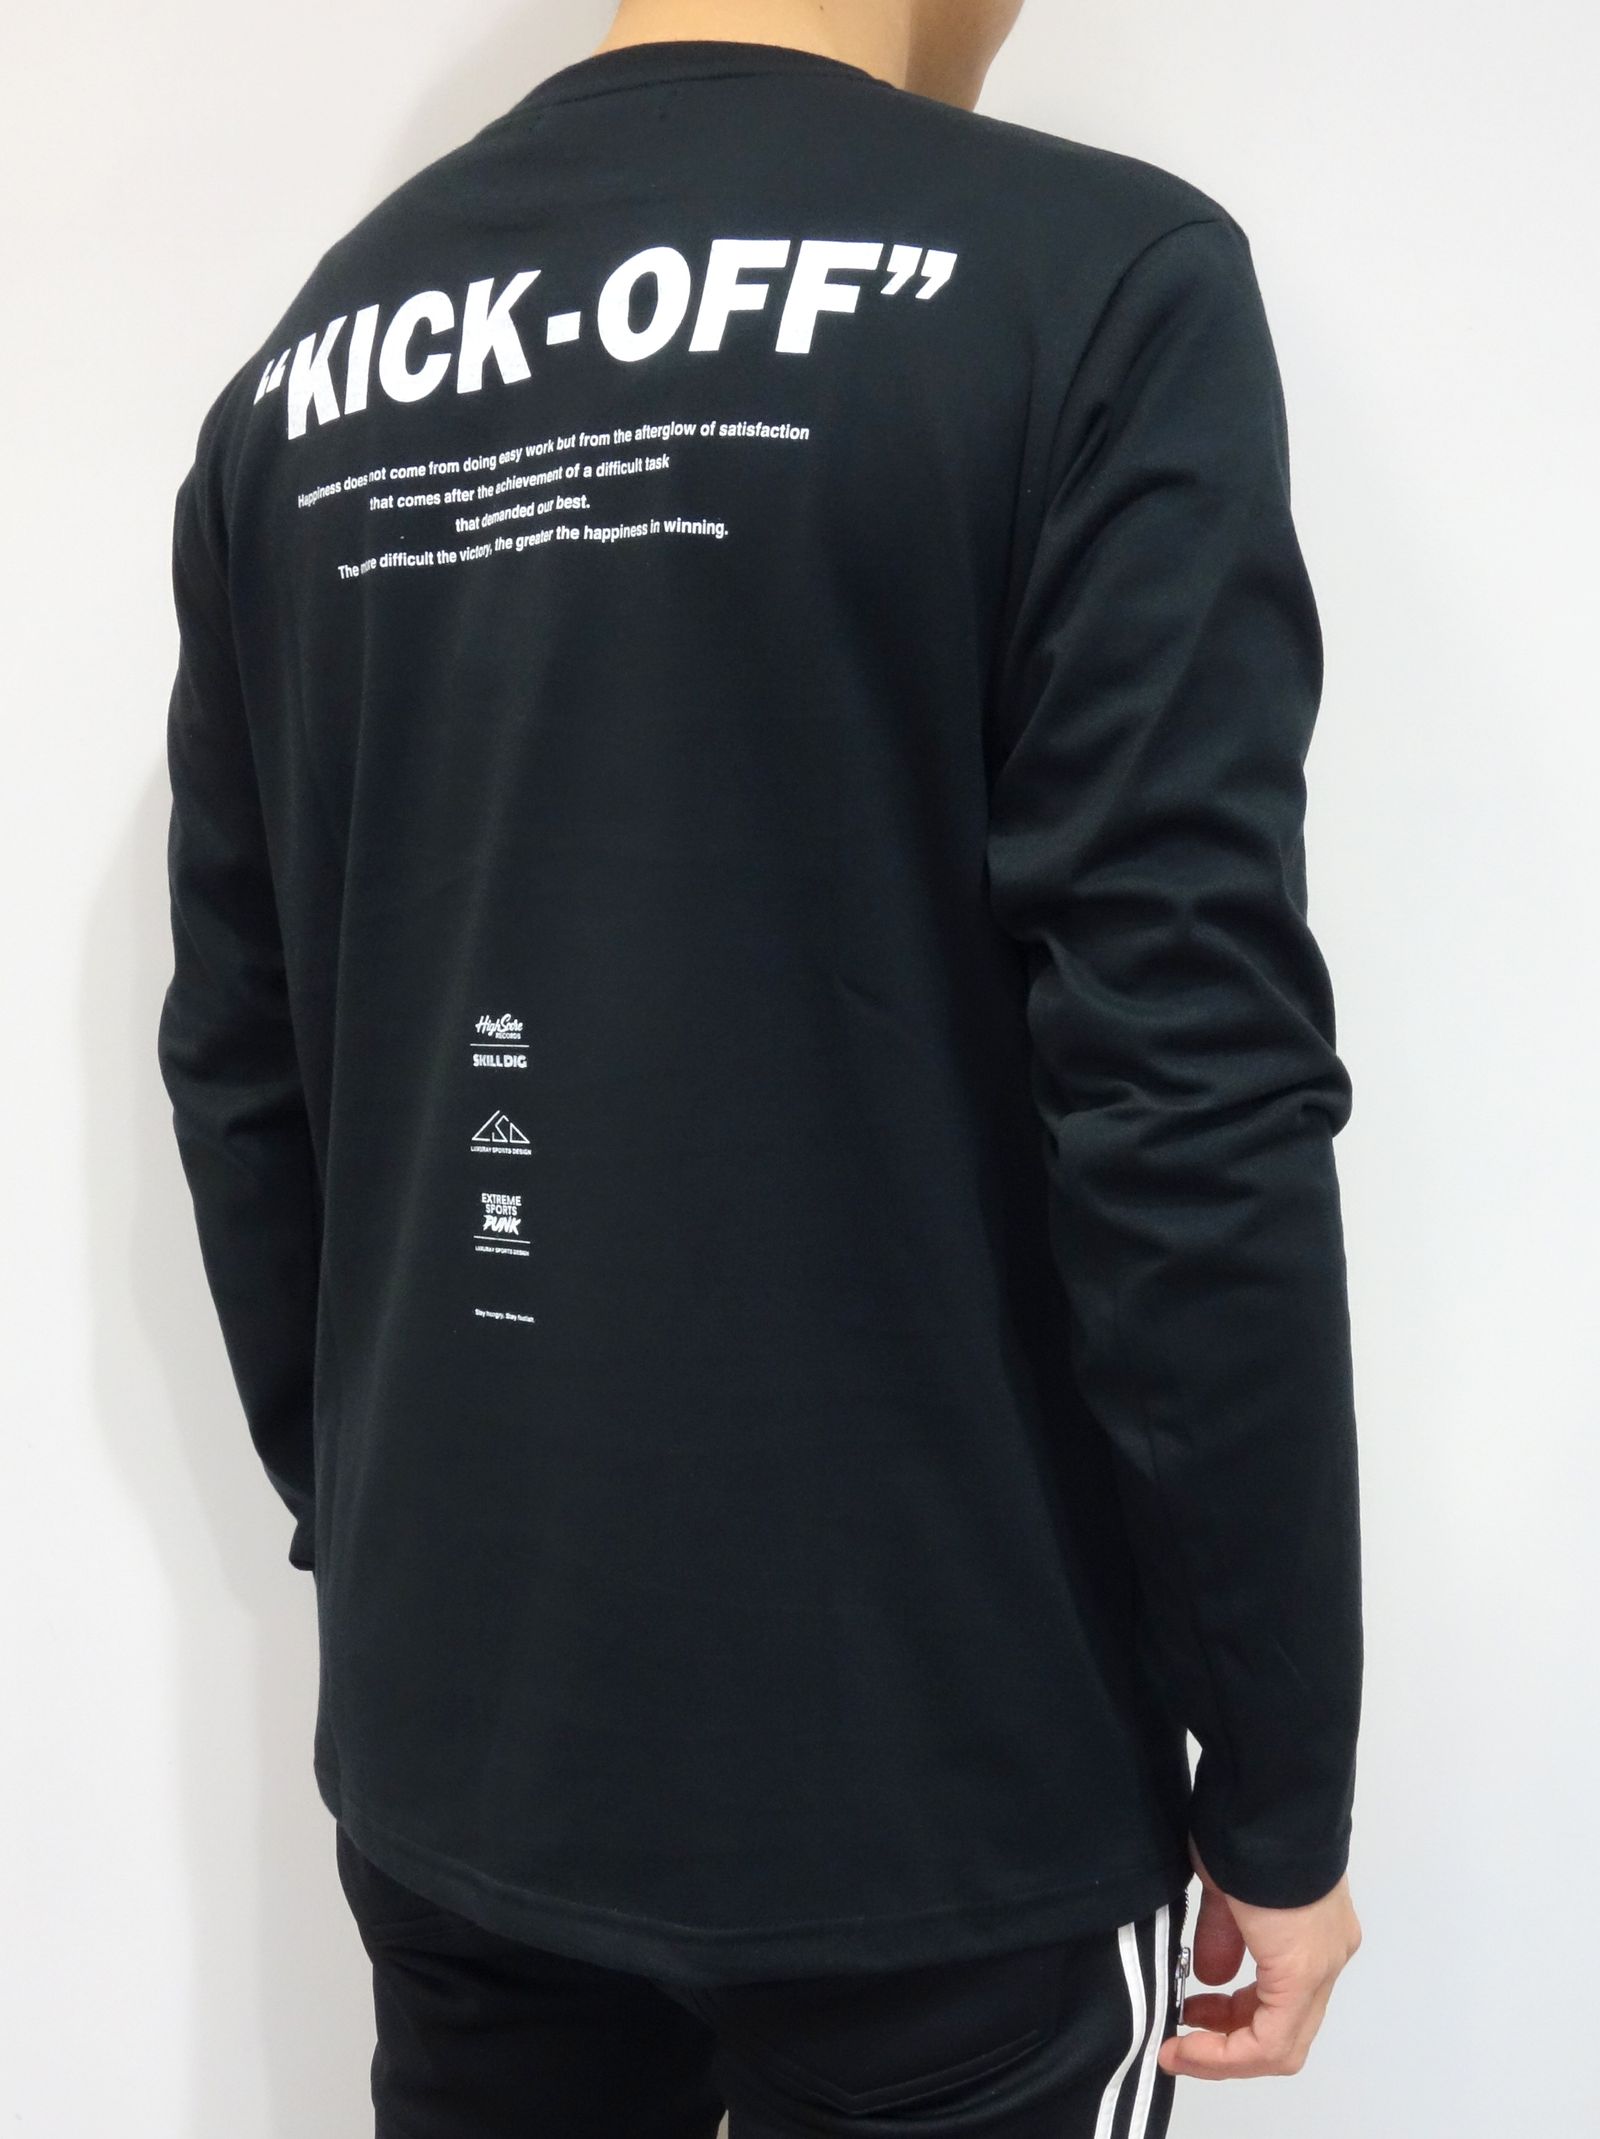 SY32 by SWEET YEARS - KICK OFF L/S TEE / 11037J / ロングスリーブT